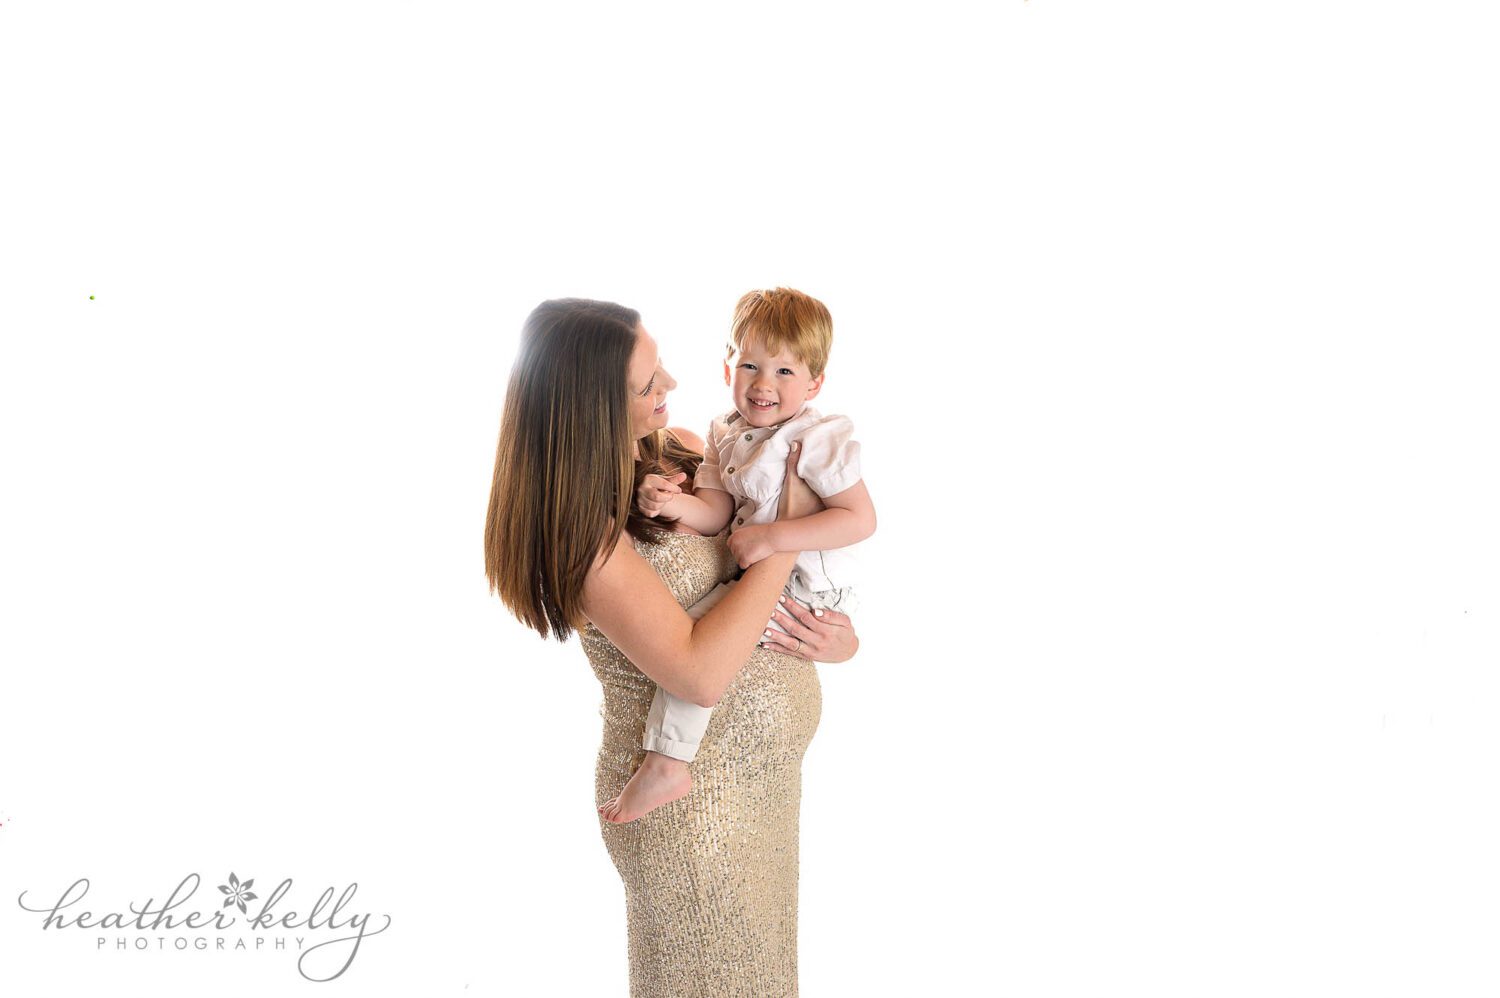 Pregnant mom is posing at her maternity portrait photography session.  There is a bright white background. Mom is in a glittery gold dress and holding her two year old son over her belly. 